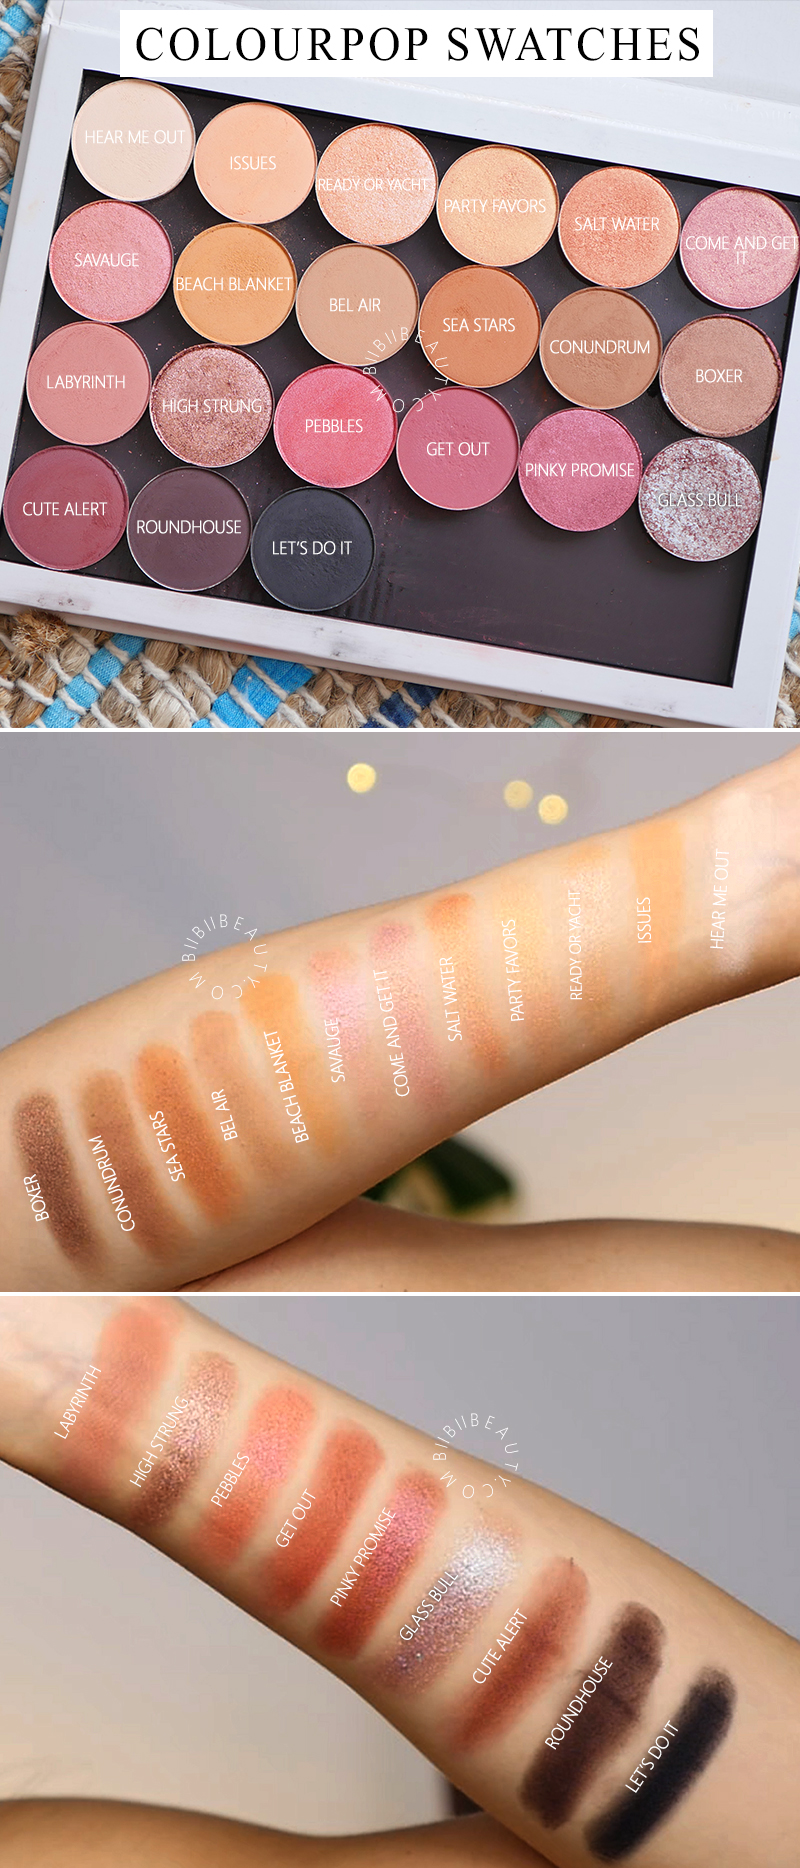 colourpop-eye-shadow-swatches-glass-bull-come-and-get-it-high-strung-boxer-cute-alert-sea-stars-salt-water-bel-air-biibiibeauty-cover